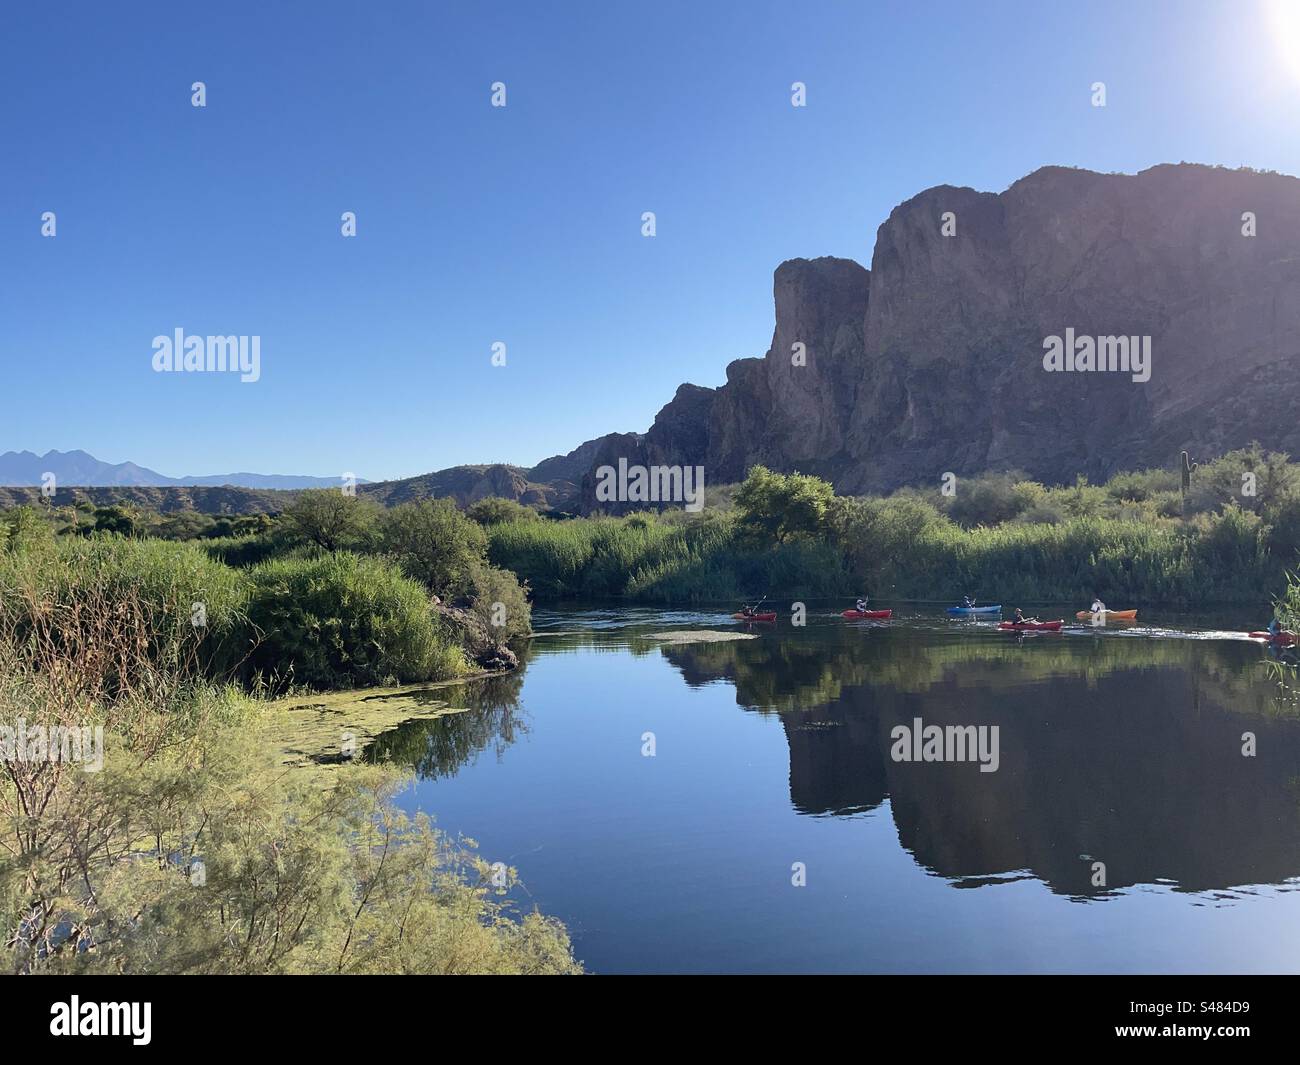 Sechs Kajakfahrer, Salt River Reflections, Superstition Mountains, strahlend blauer Himmel, Tonto National Forest, North Water Users Circle, Mesa, Arizona Stockfoto